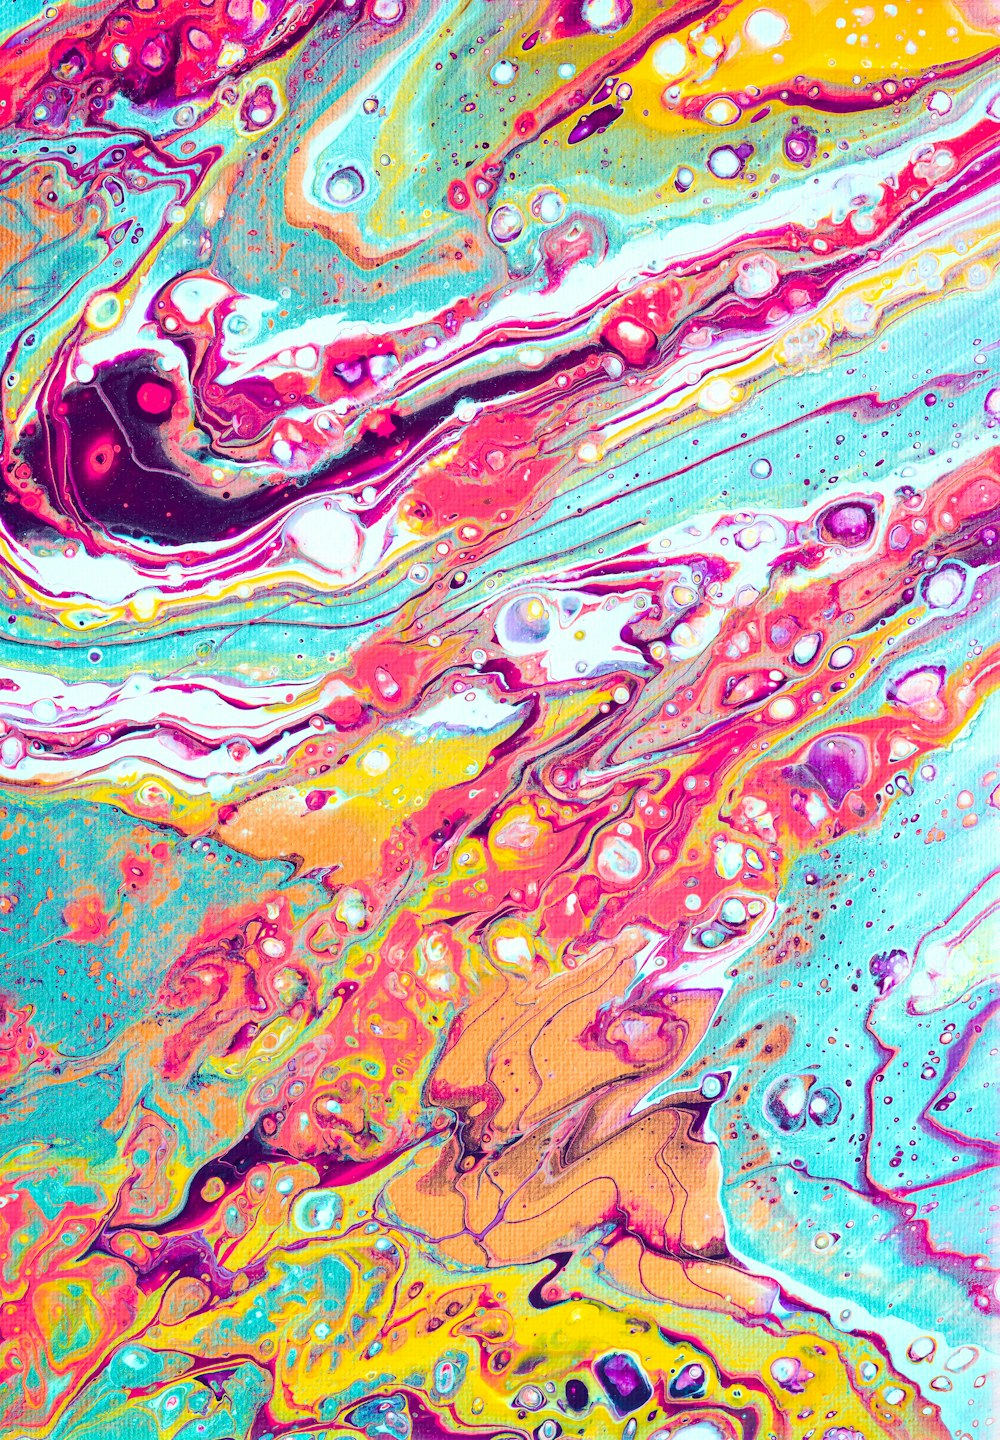 30k+ Acrylic Pour Pictures  Download Free Images on Unsplash